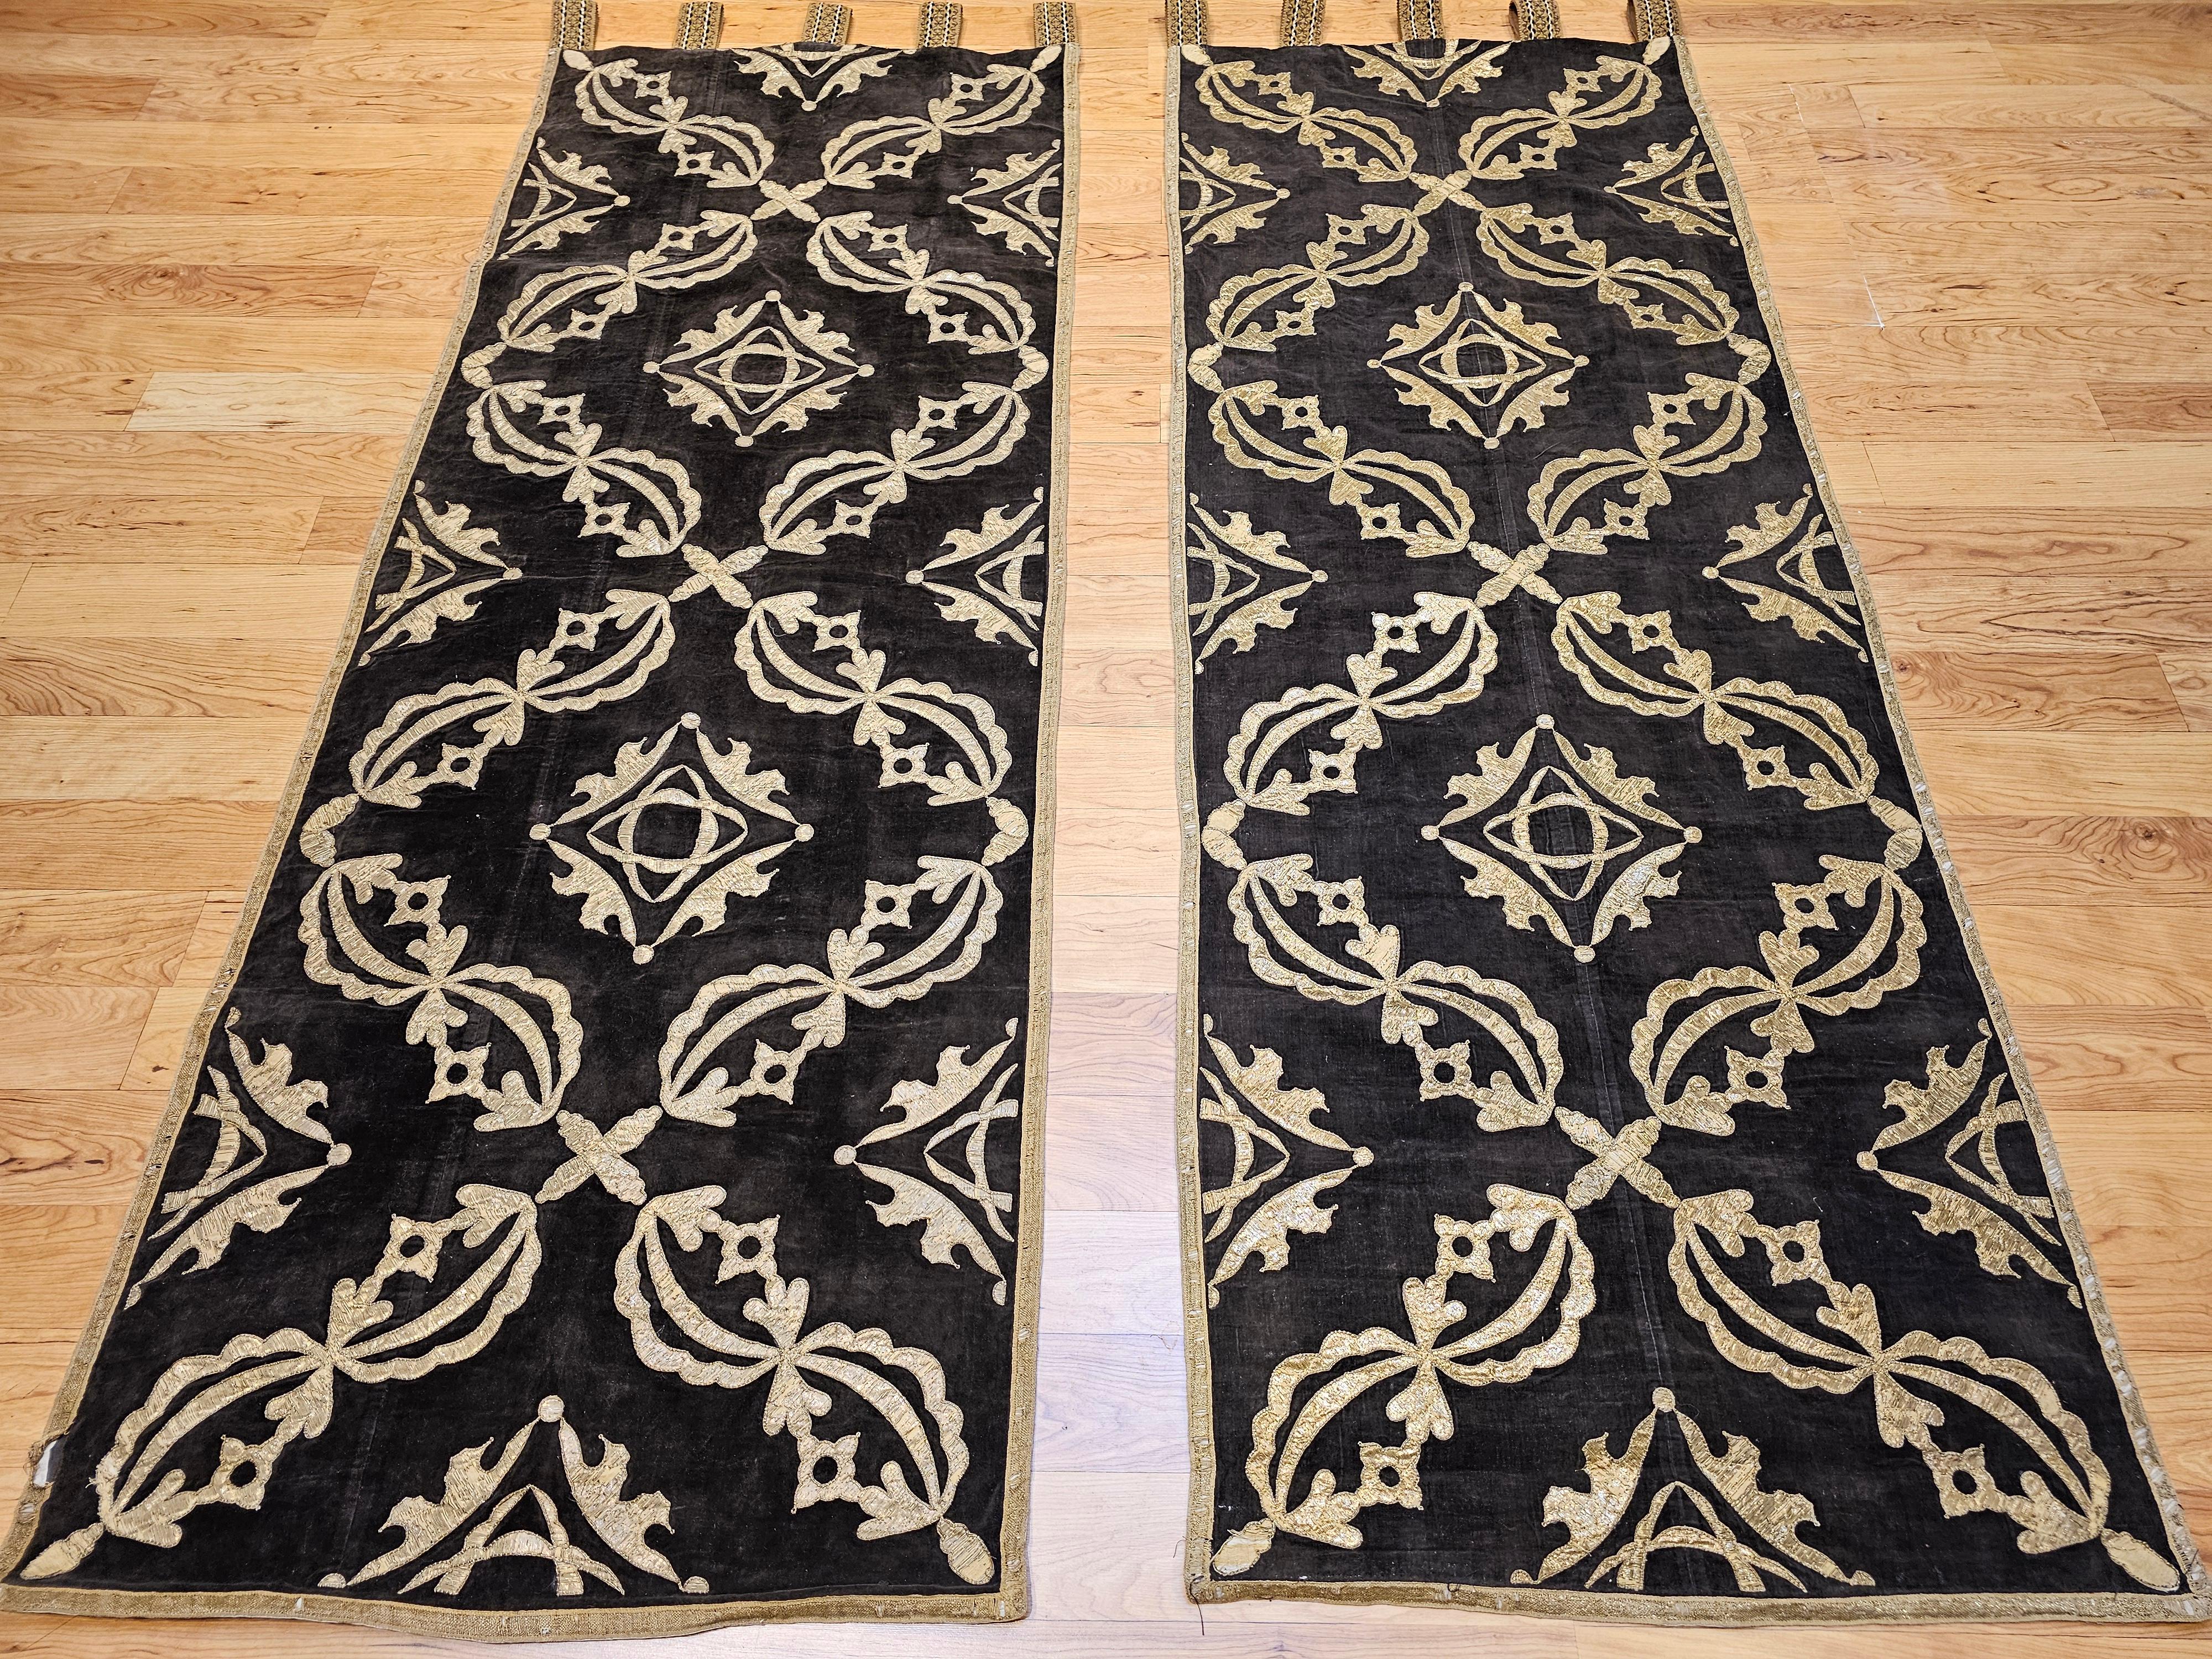 18th Century Ottoman Gilt Threads Brocade Embroidery Textile Panels (A Pair) For Sale 7